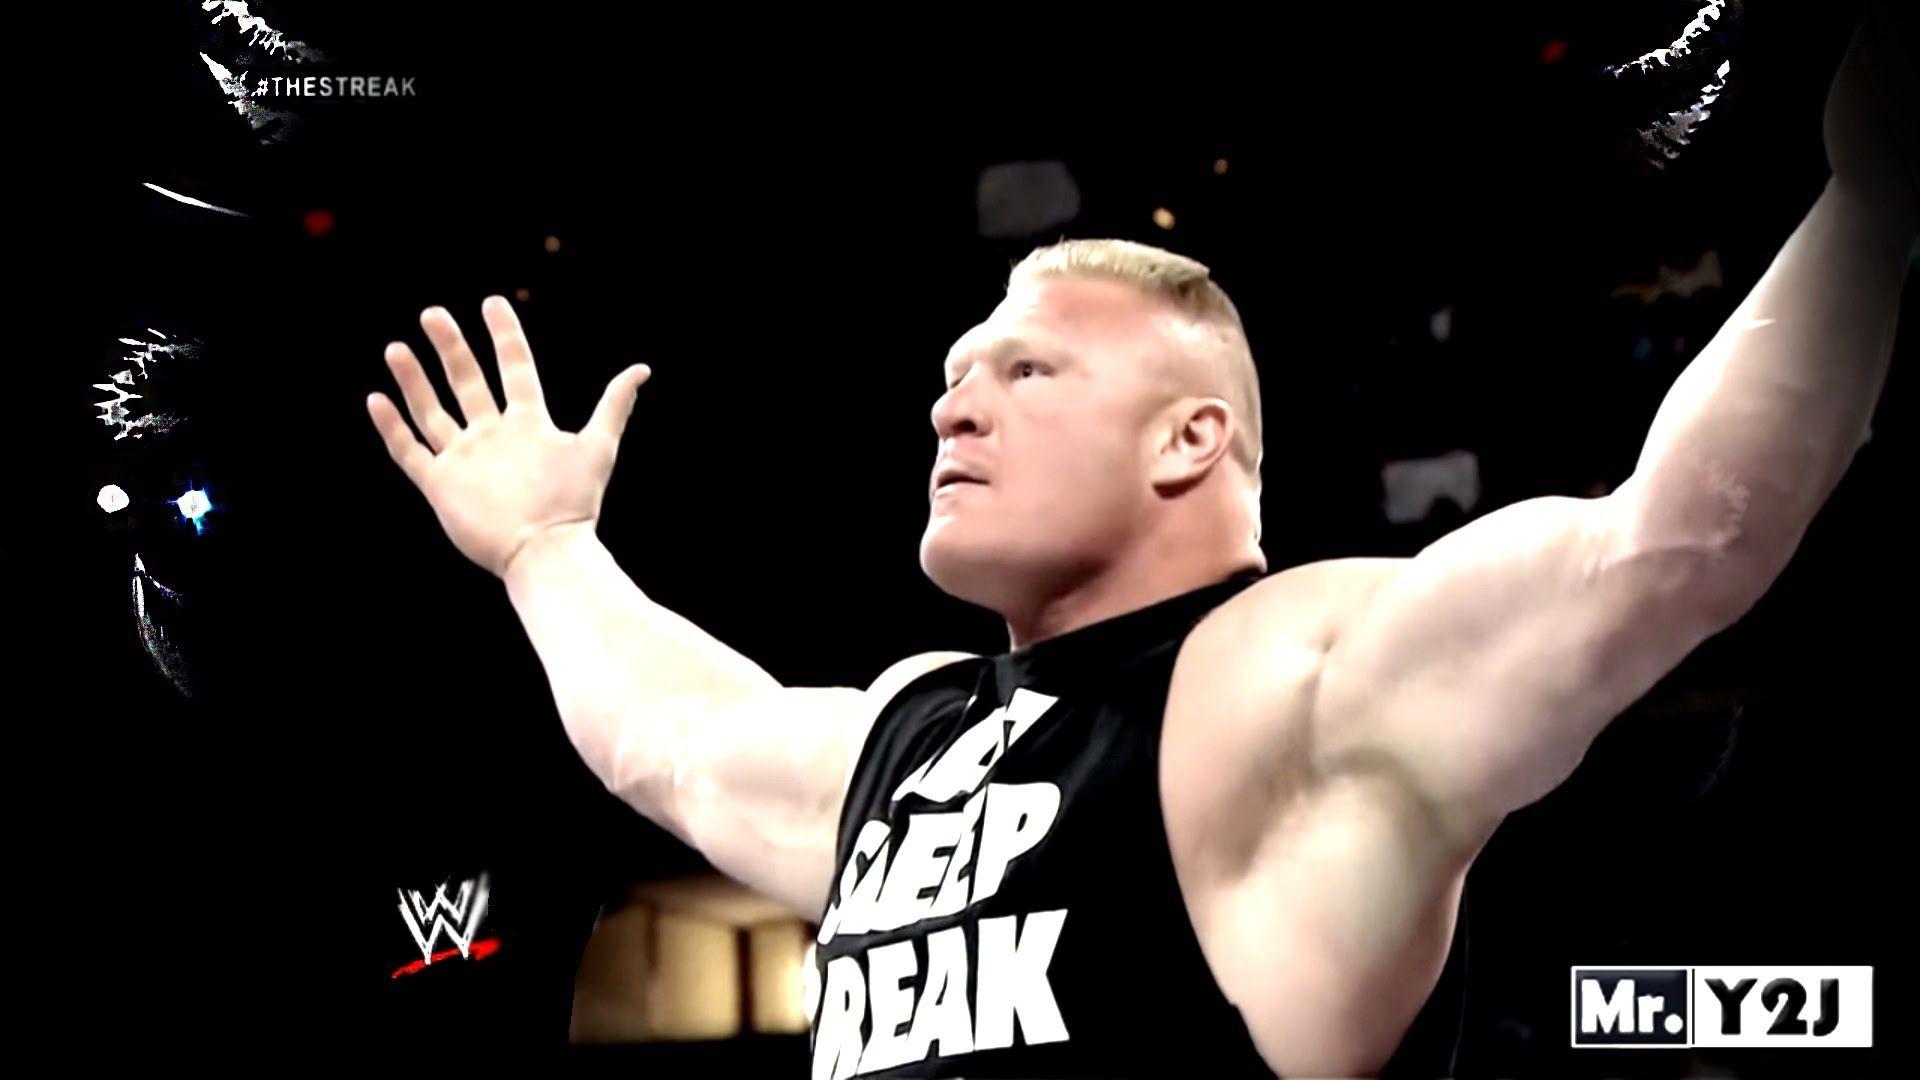 Brock Lesnar WWE Star Wallpaper HD Photo Collections